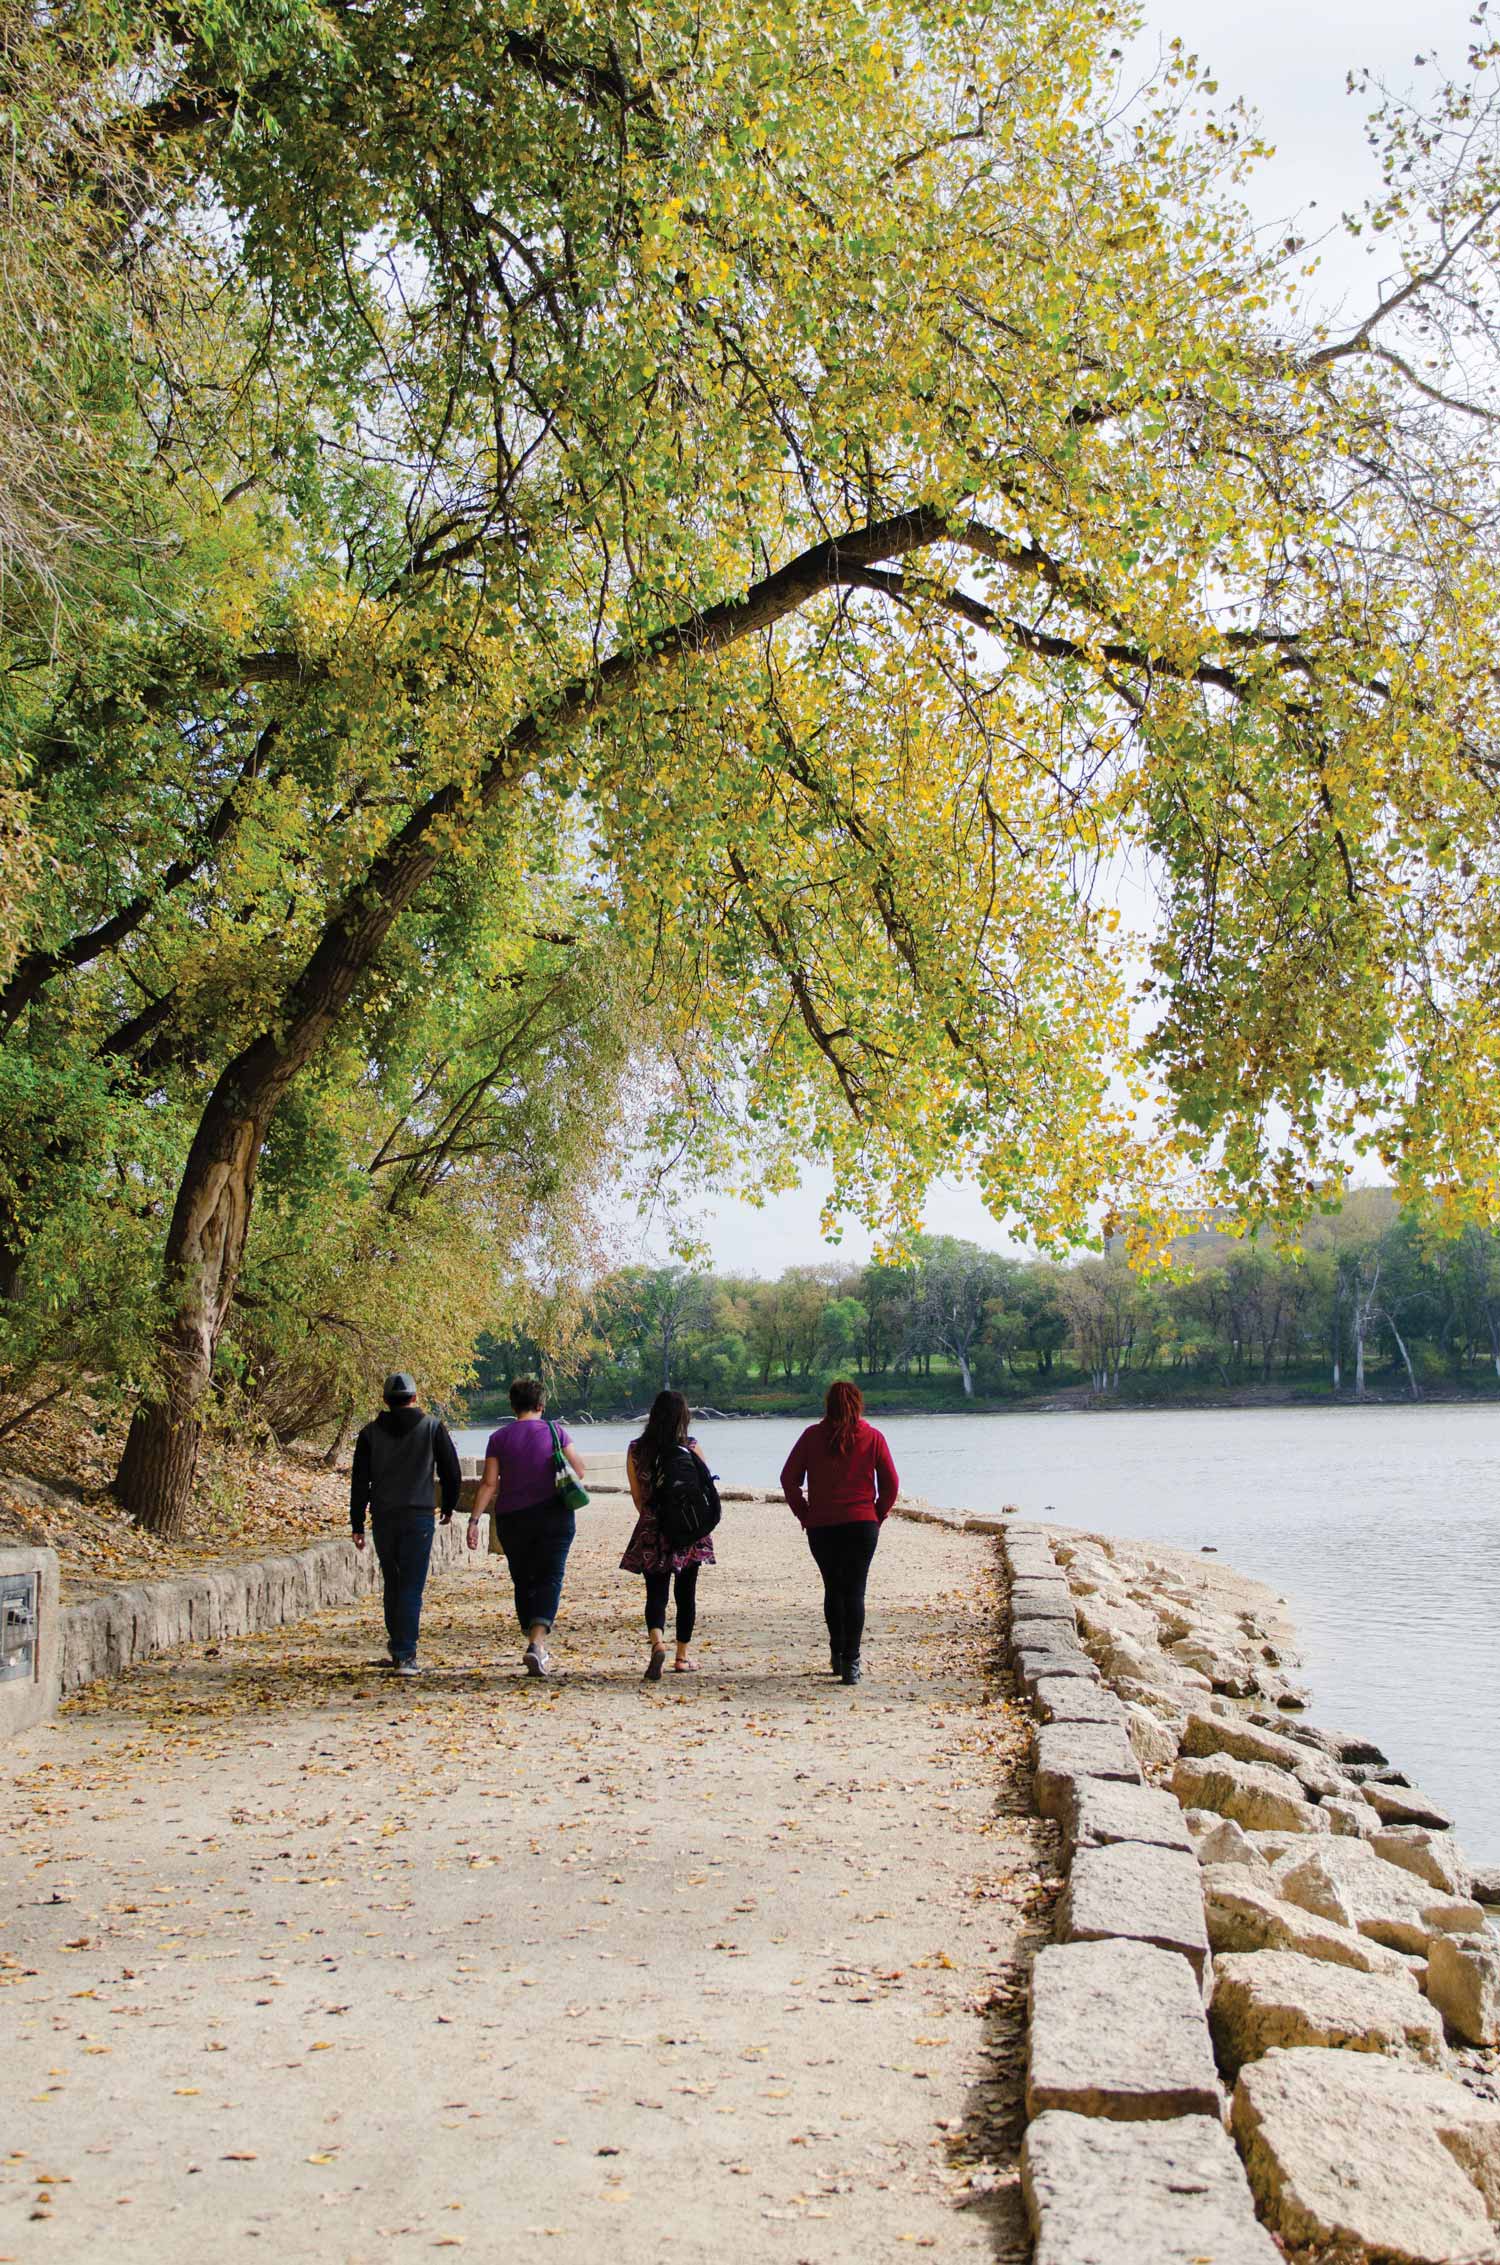 Four people walking on a raised path alongside a river, separated by large stone bricks. A large tree arches over them.